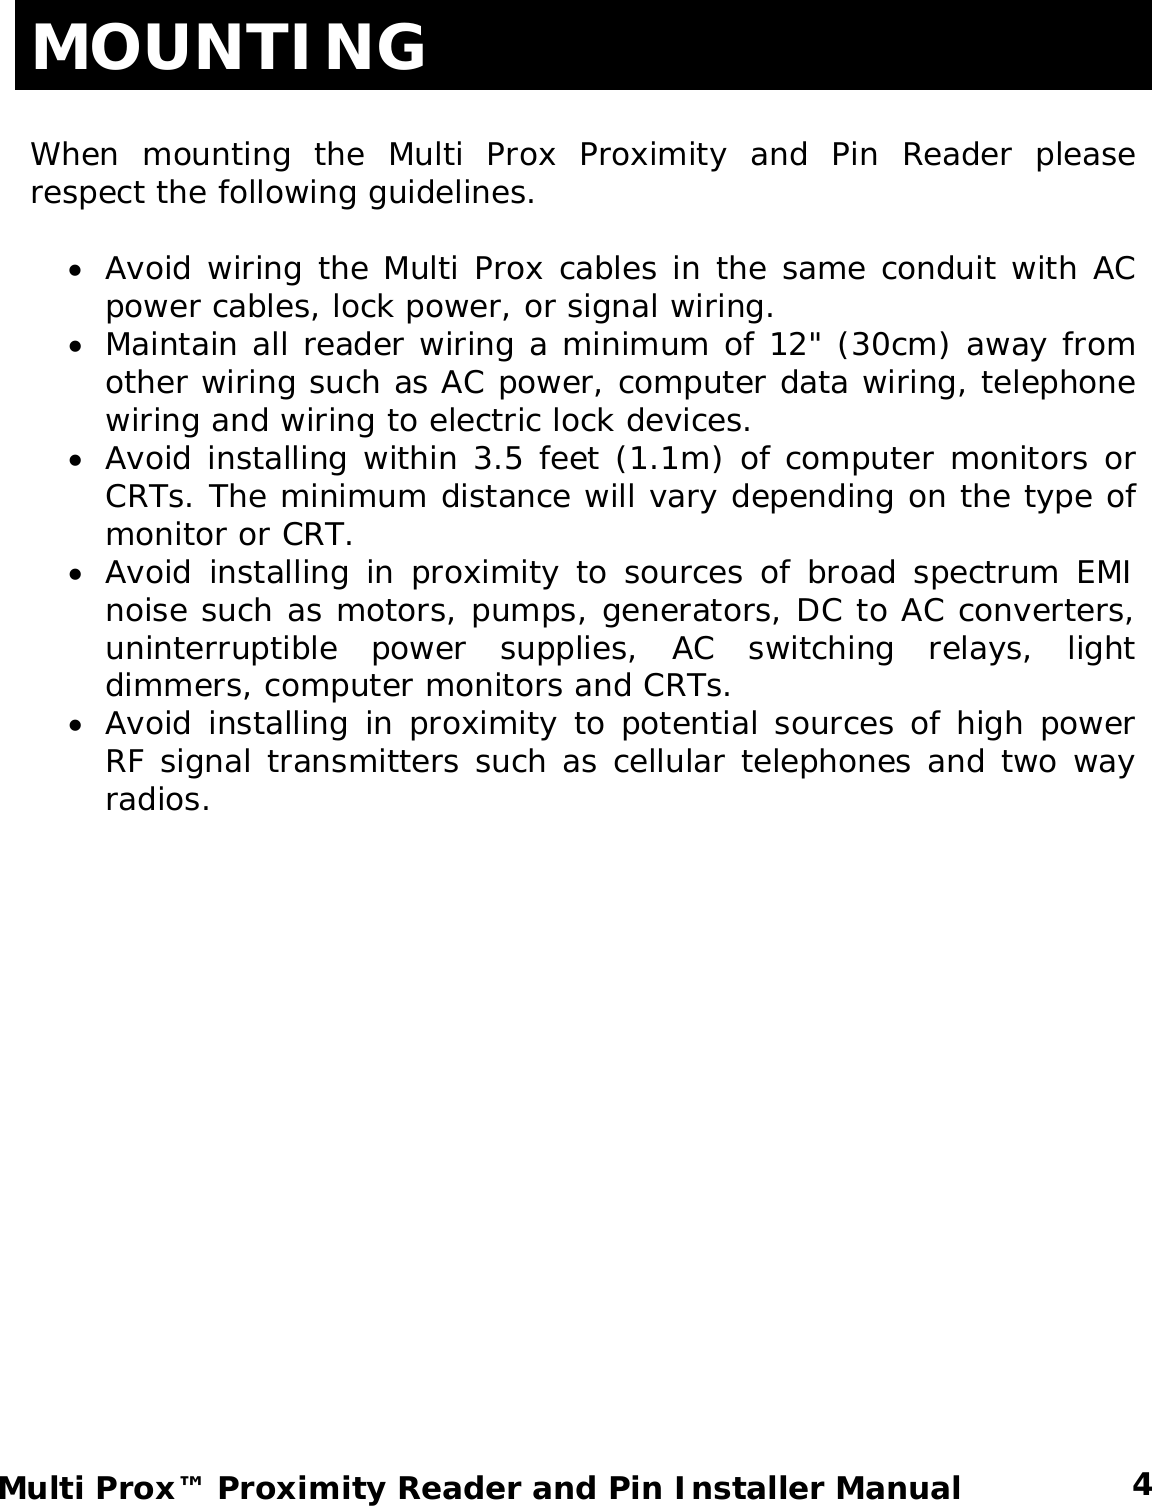 MOUNTING  When mounting the Multi Prox Proximity and Pin Reader please respect the following guidelines.  • Avoid wiring the Multi Prox cables in the same conduit with AC power cables, lock power, or signal wiring. • Maintain all reader wiring a minimum of 12&quot; (30cm) away from other wiring such as AC power, computer data wiring, telephone wiring and wiring to electric lock devices. • Avoid installing within 3.5 feet (1.1m) of computer monitors or CRTs. The minimum distance will vary depending on the type of monitor or CRT. • Avoid installing in proximity to sources of broad spectrum EMI noise such as motors, pumps, generators, DC to AC converters, uninterruptible power supplies, AC switching relays, light dimmers, computer monitors and CRTs. • Avoid installing in proximity to potential sources of high power RF signal transmitters such as cellular telephones and two way radios.  4 Multi Prox™ Proximity Reader and Pin Installer Manual 